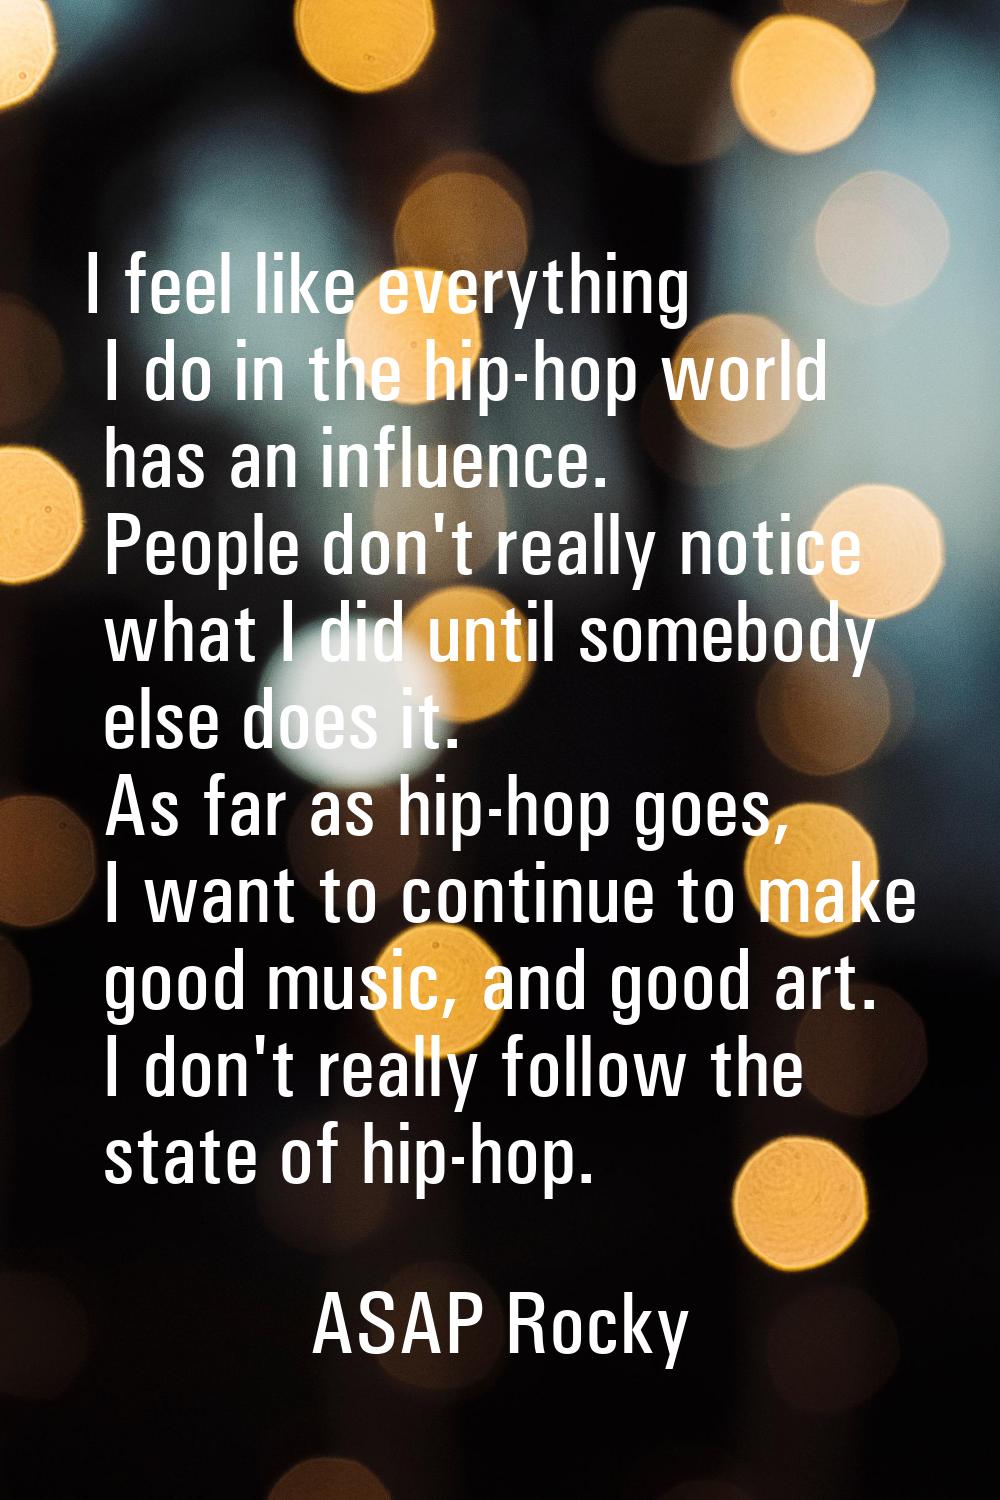 I feel like everything I do in the hip-hop world has an influence. People don't really notice what 